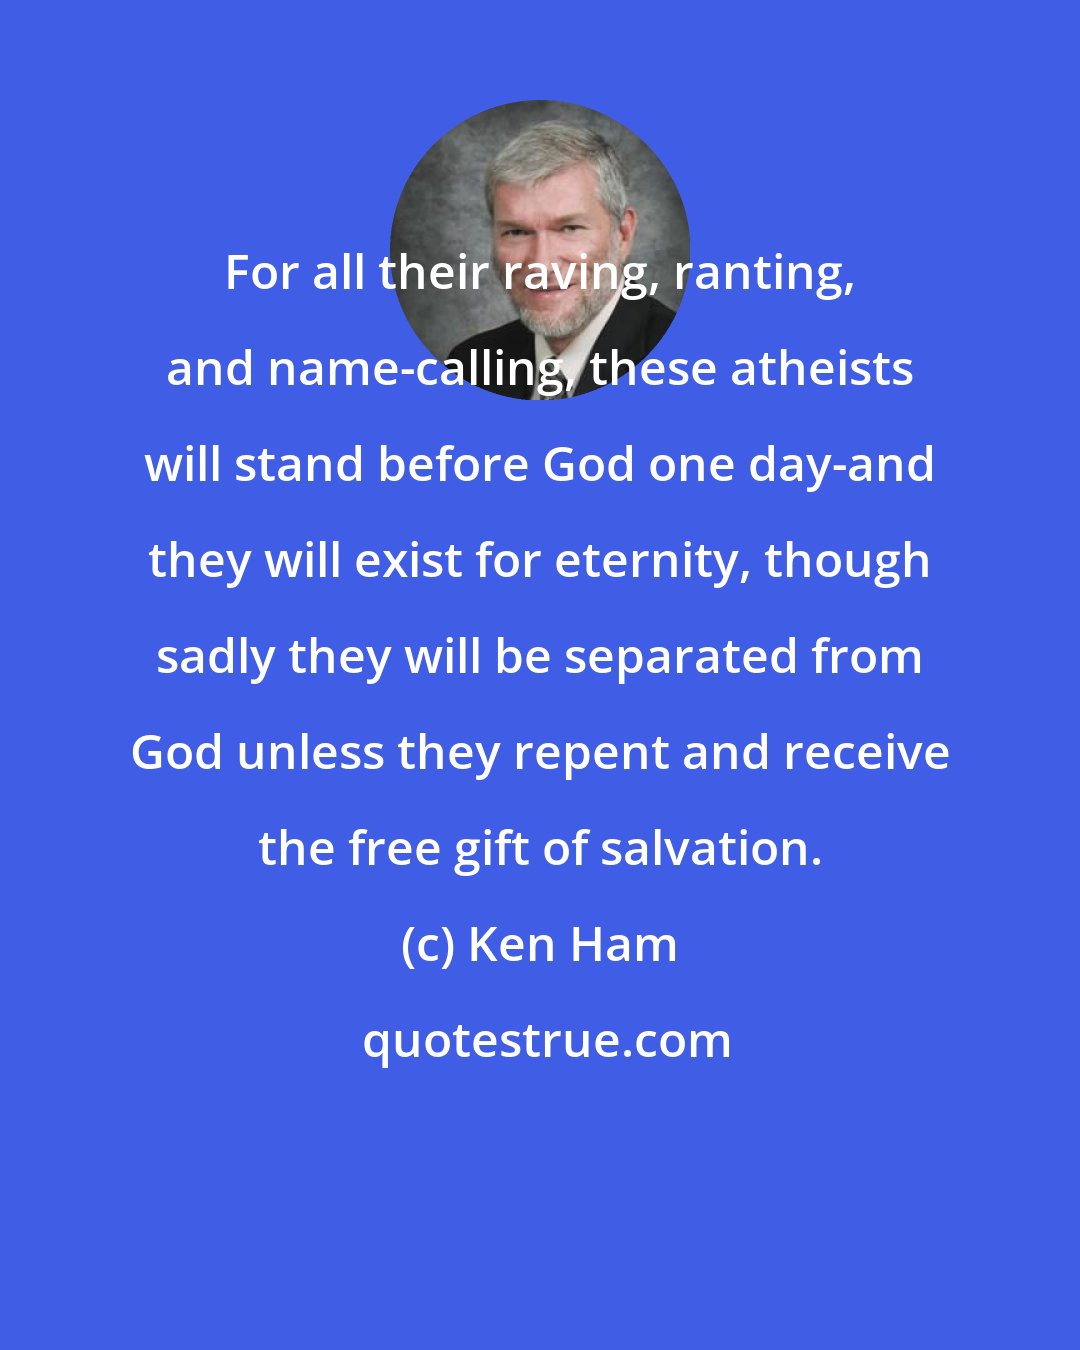 Ken Ham: For all their raving, ranting, and name-calling, these atheists will stand before God one day-and they will exist for eternity, though sadly they will be separated from God unless they repent and receive the free gift of salvation.